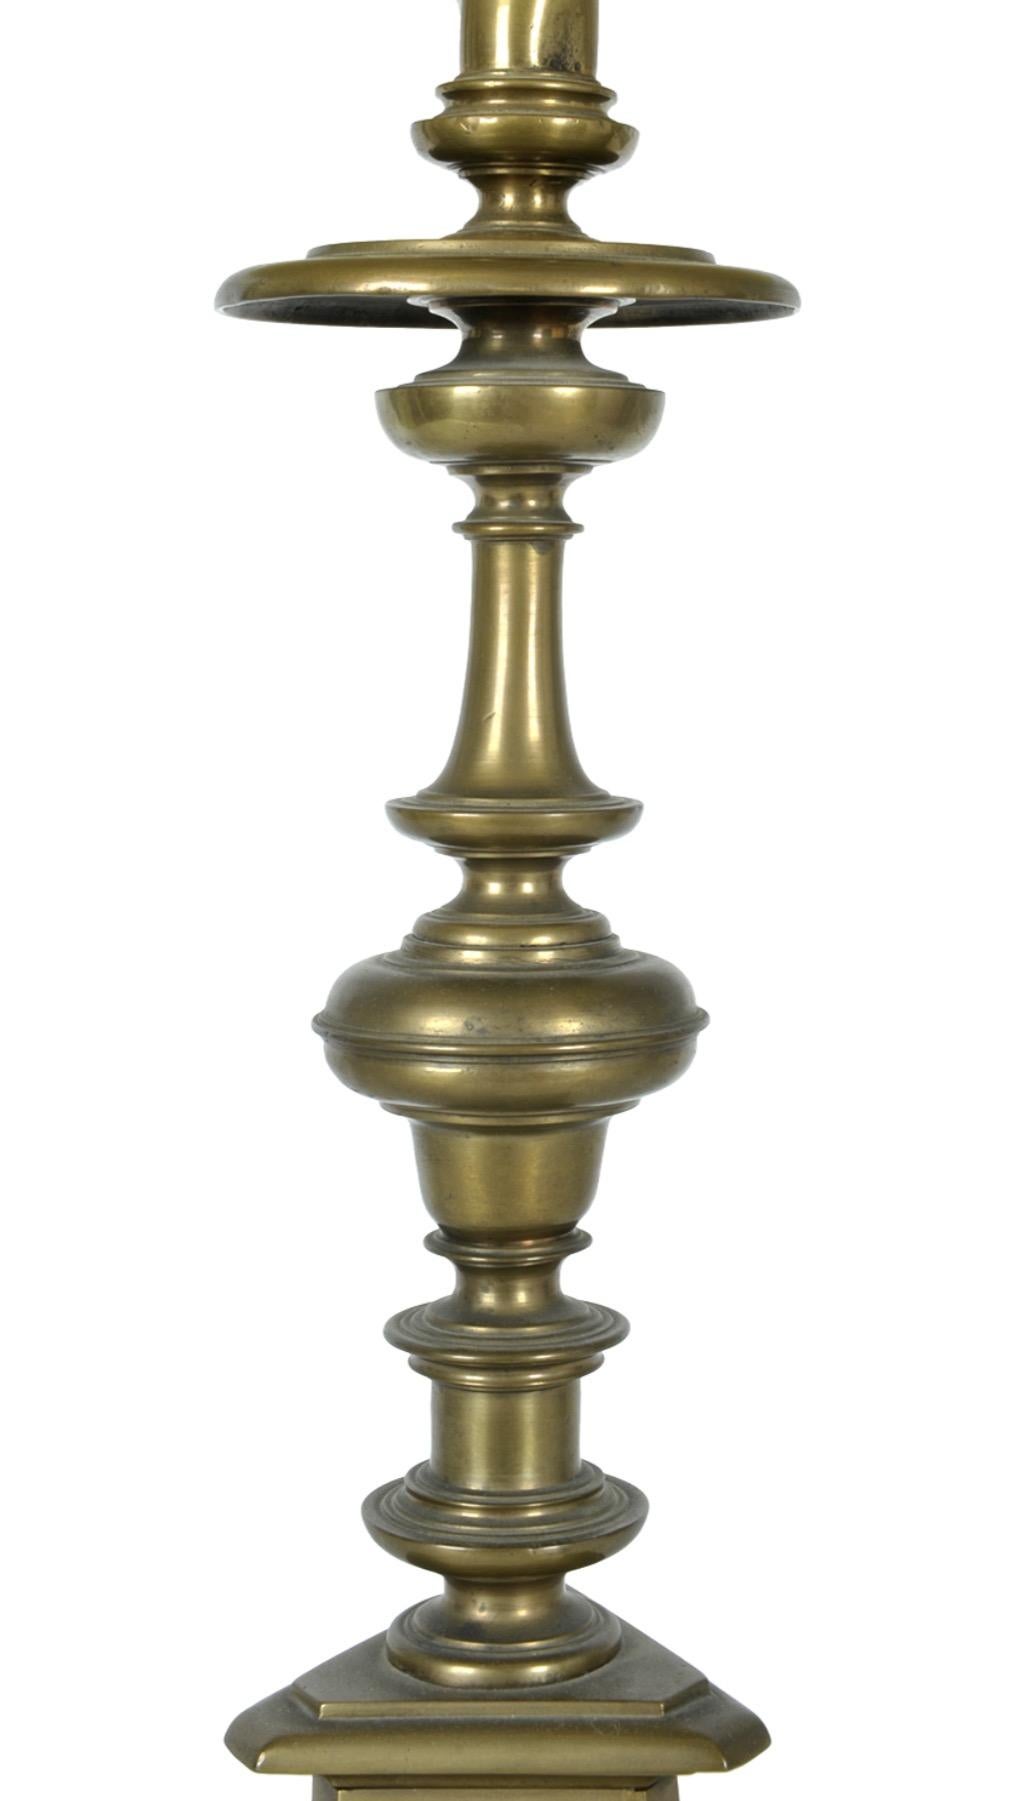 Pair of Dutch Style Candlesticks, 18th Century, Bronze For Sale 2